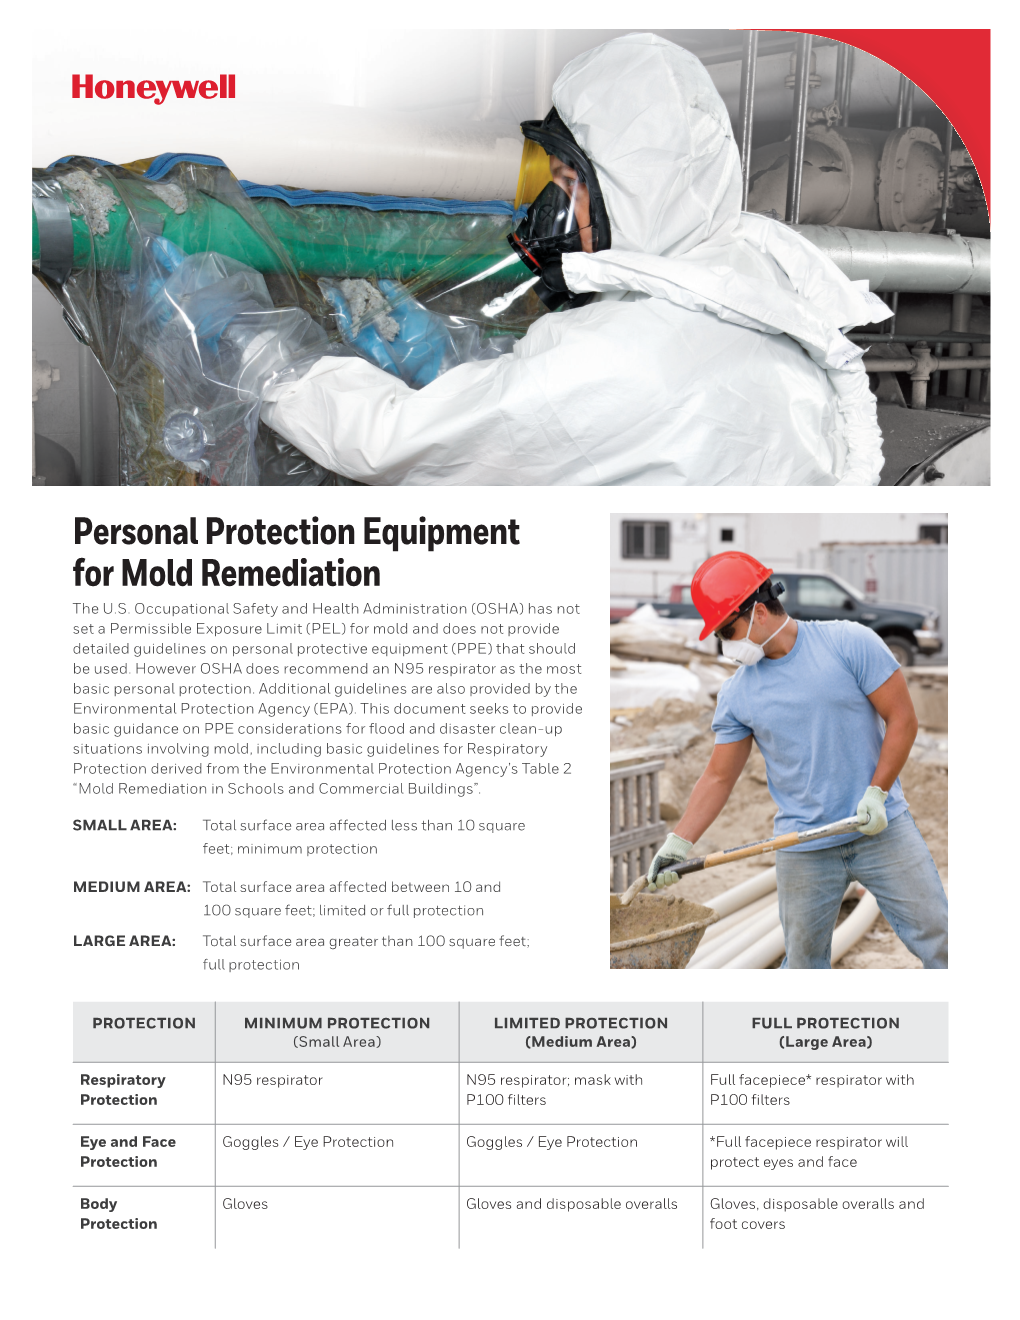 Personal Protective Equipment (PPE) for Mold Remediation